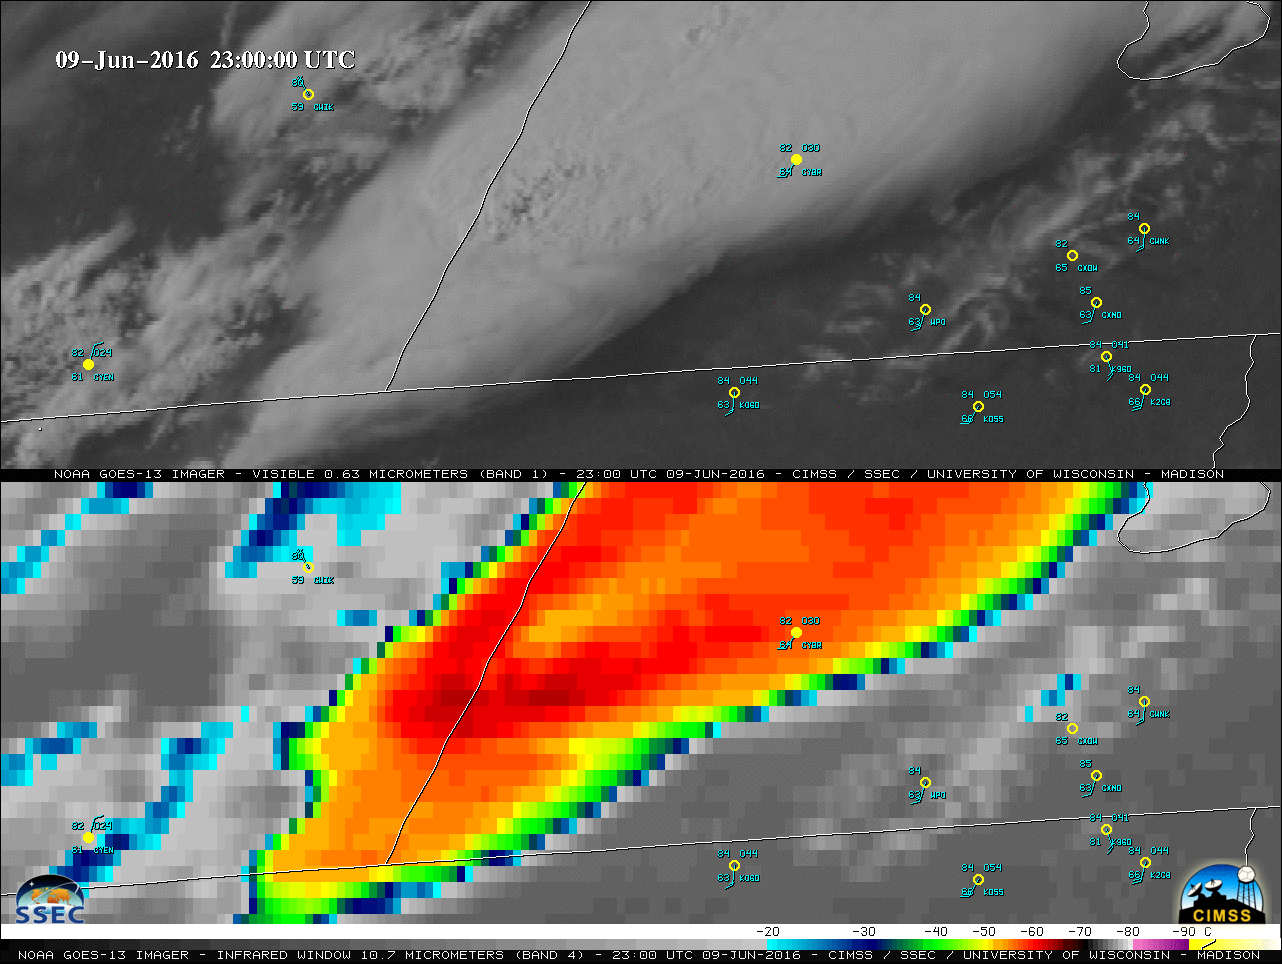 GOES-13 Visible (0.63 um, top) and Infrared Window (10.7 um, bottom) images [click to play animation]